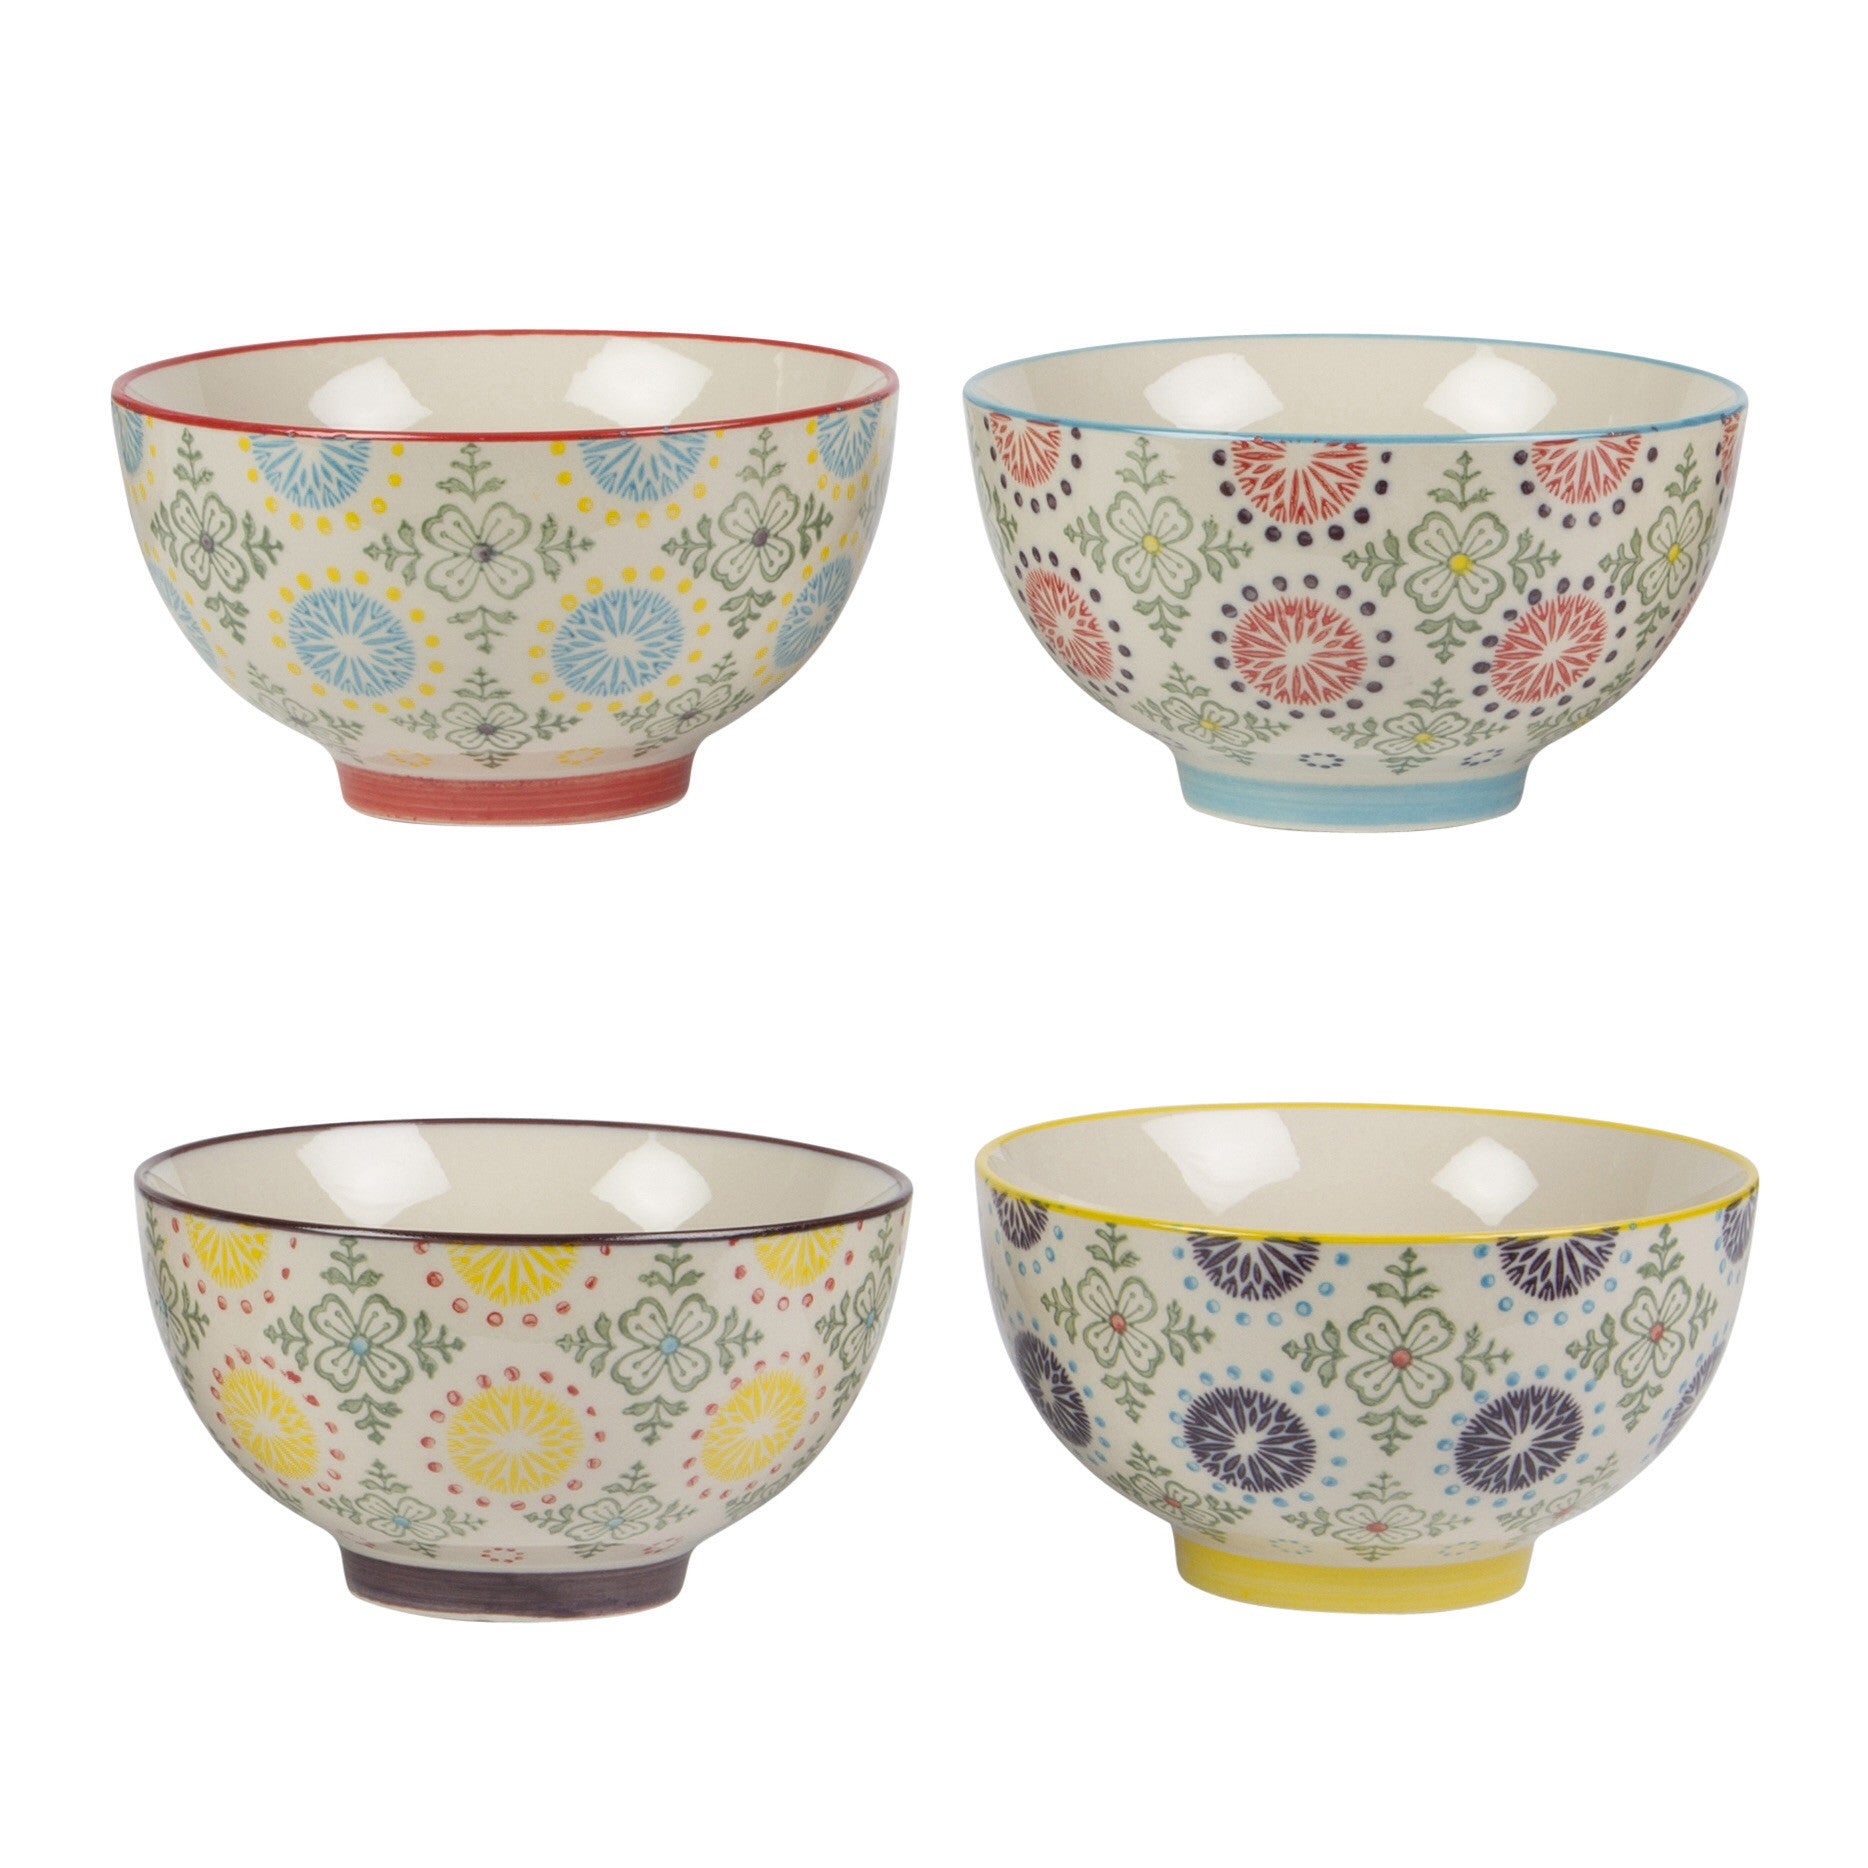 Snack bowls with multicolour designs